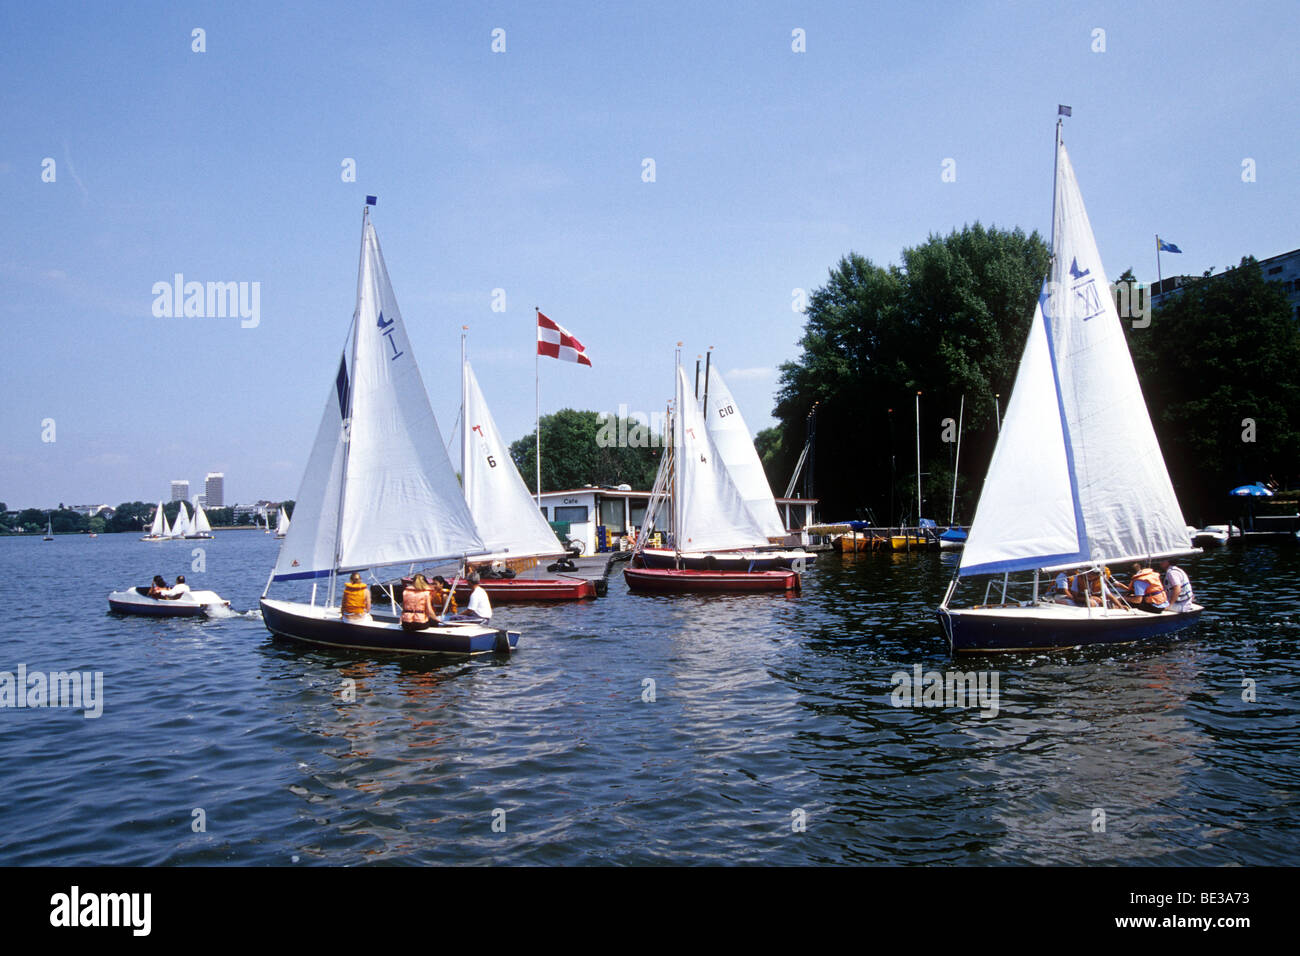 Sailing on the Outer Alster lake, Hanseatic City of Hamburg, Germany, Europe Stock Photo